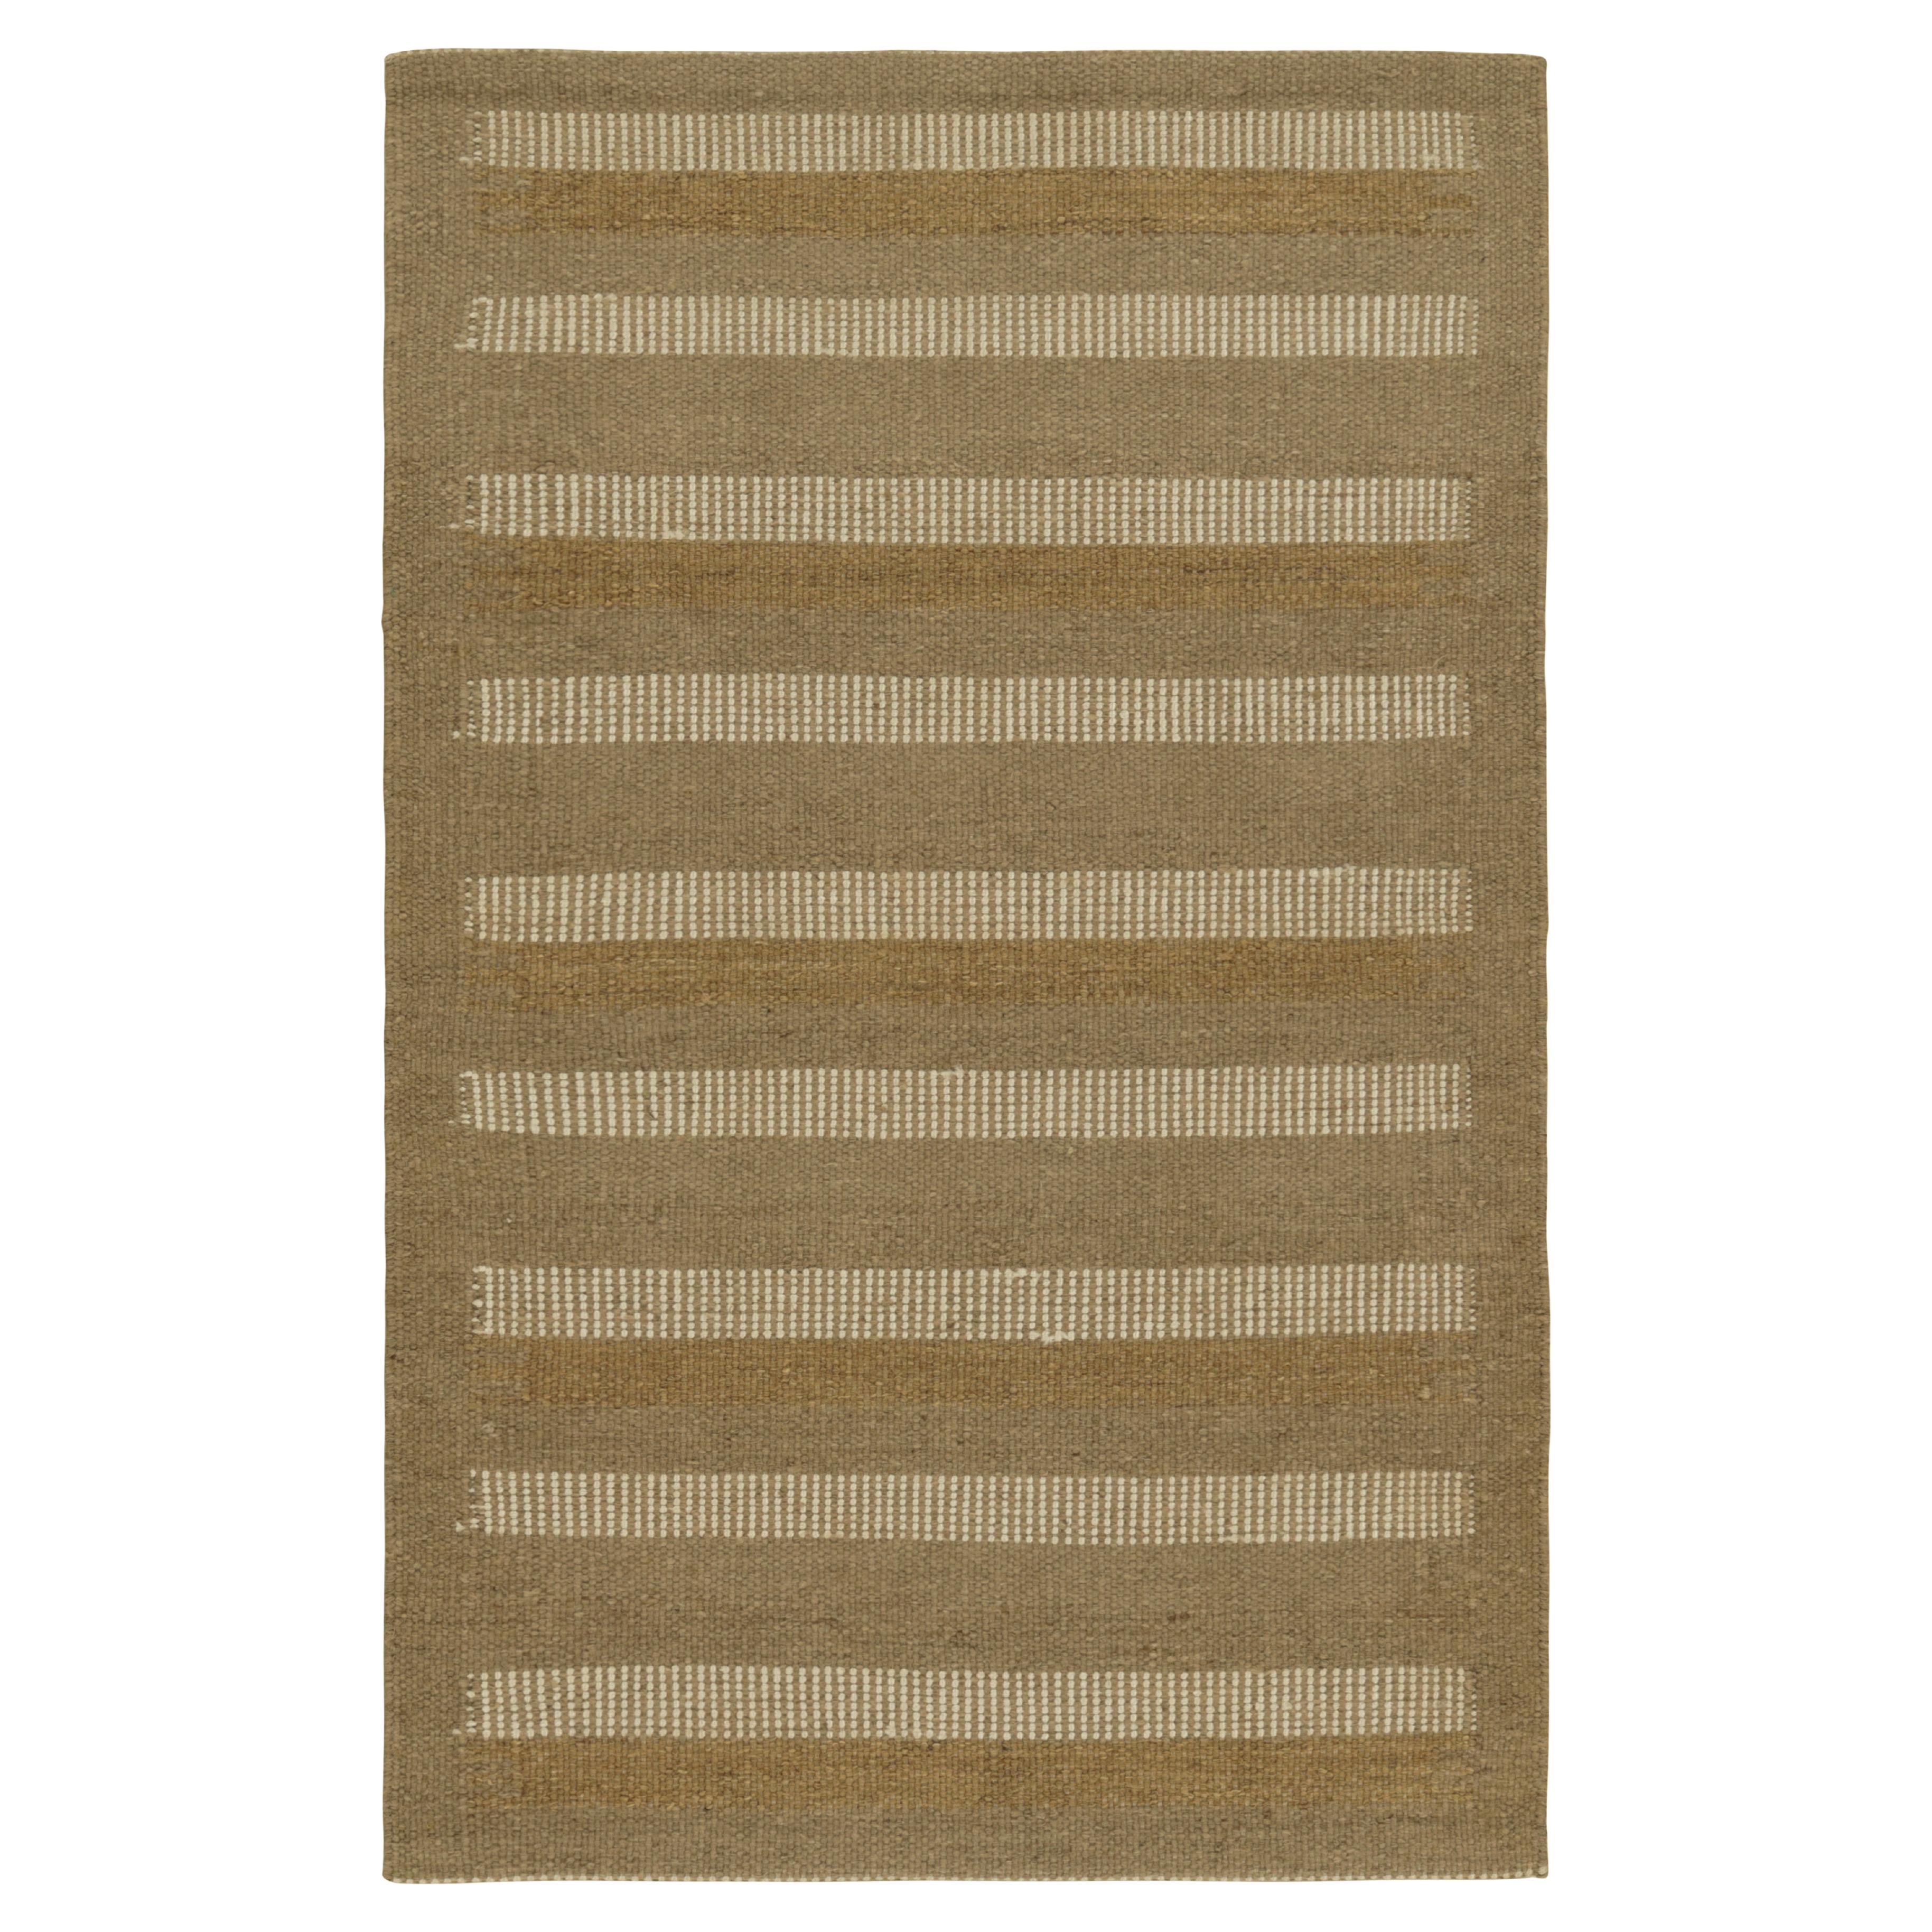 Rug & Kilim’s Scandinavian Style Rug with Beige and Taupe Geometric Stripes